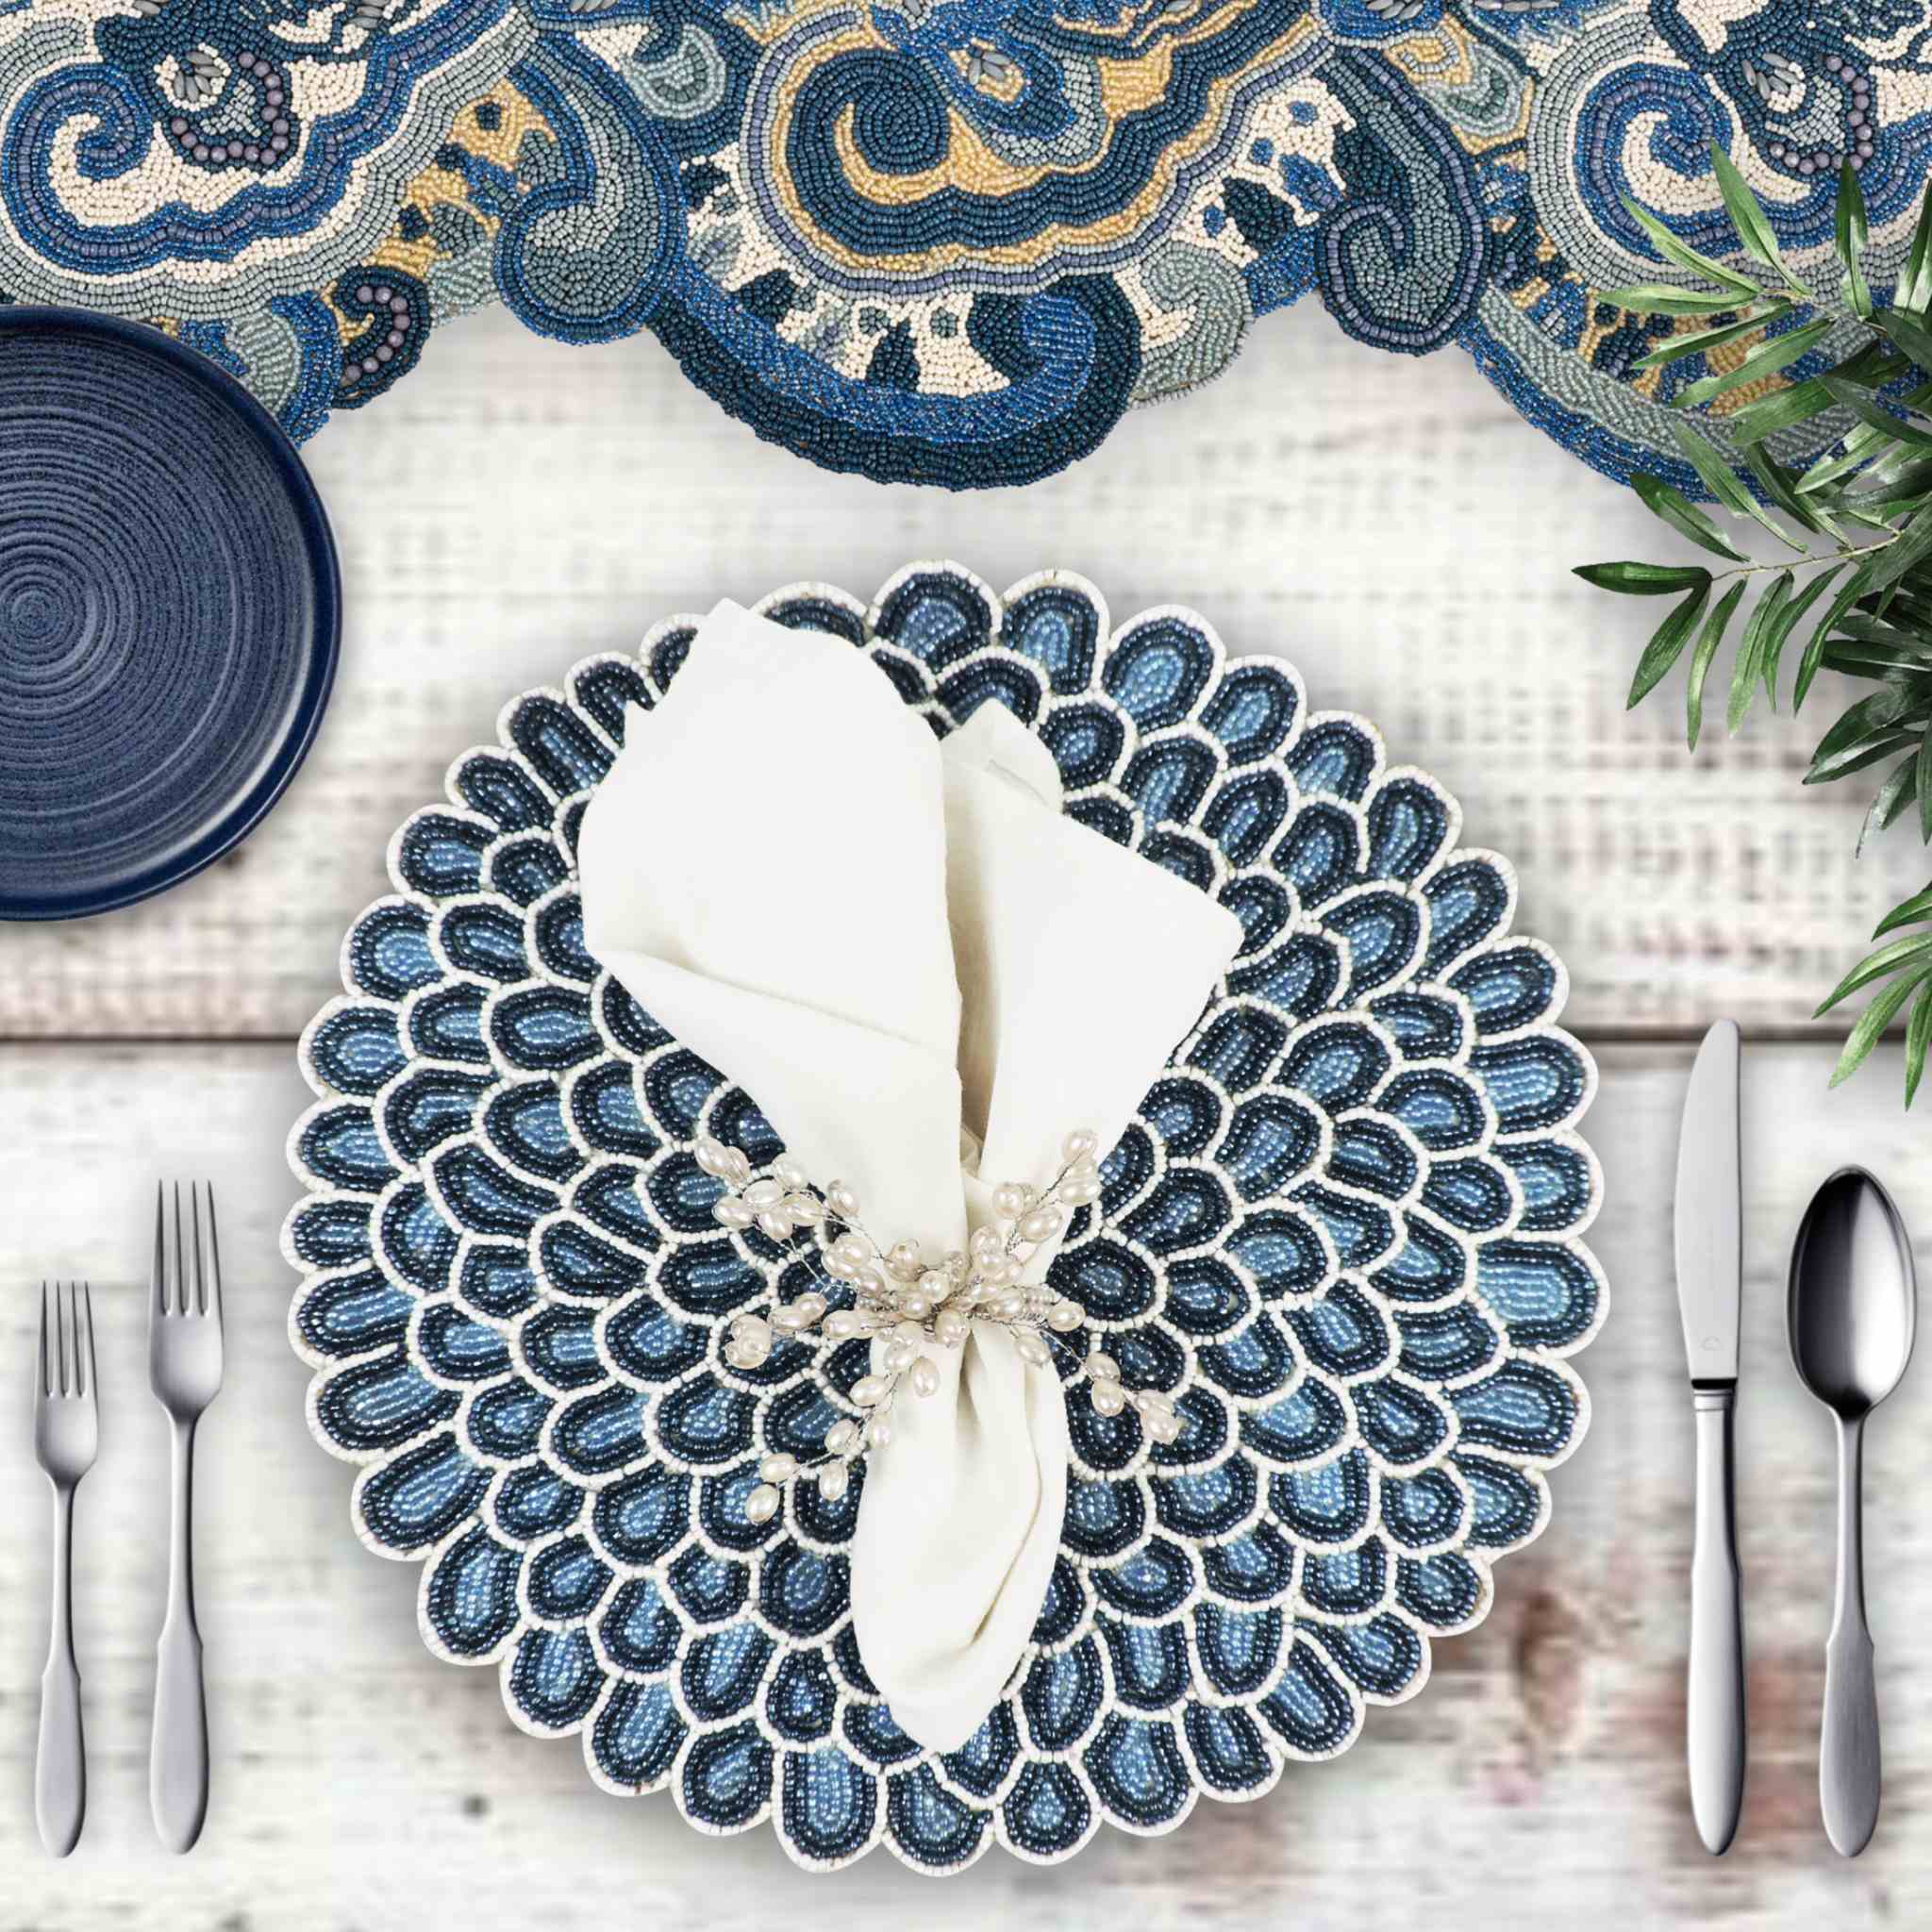 Dahlia Bead Table Setting for 4 - Embroidered Placemats, Napkin Rings & Table Runner in Blue